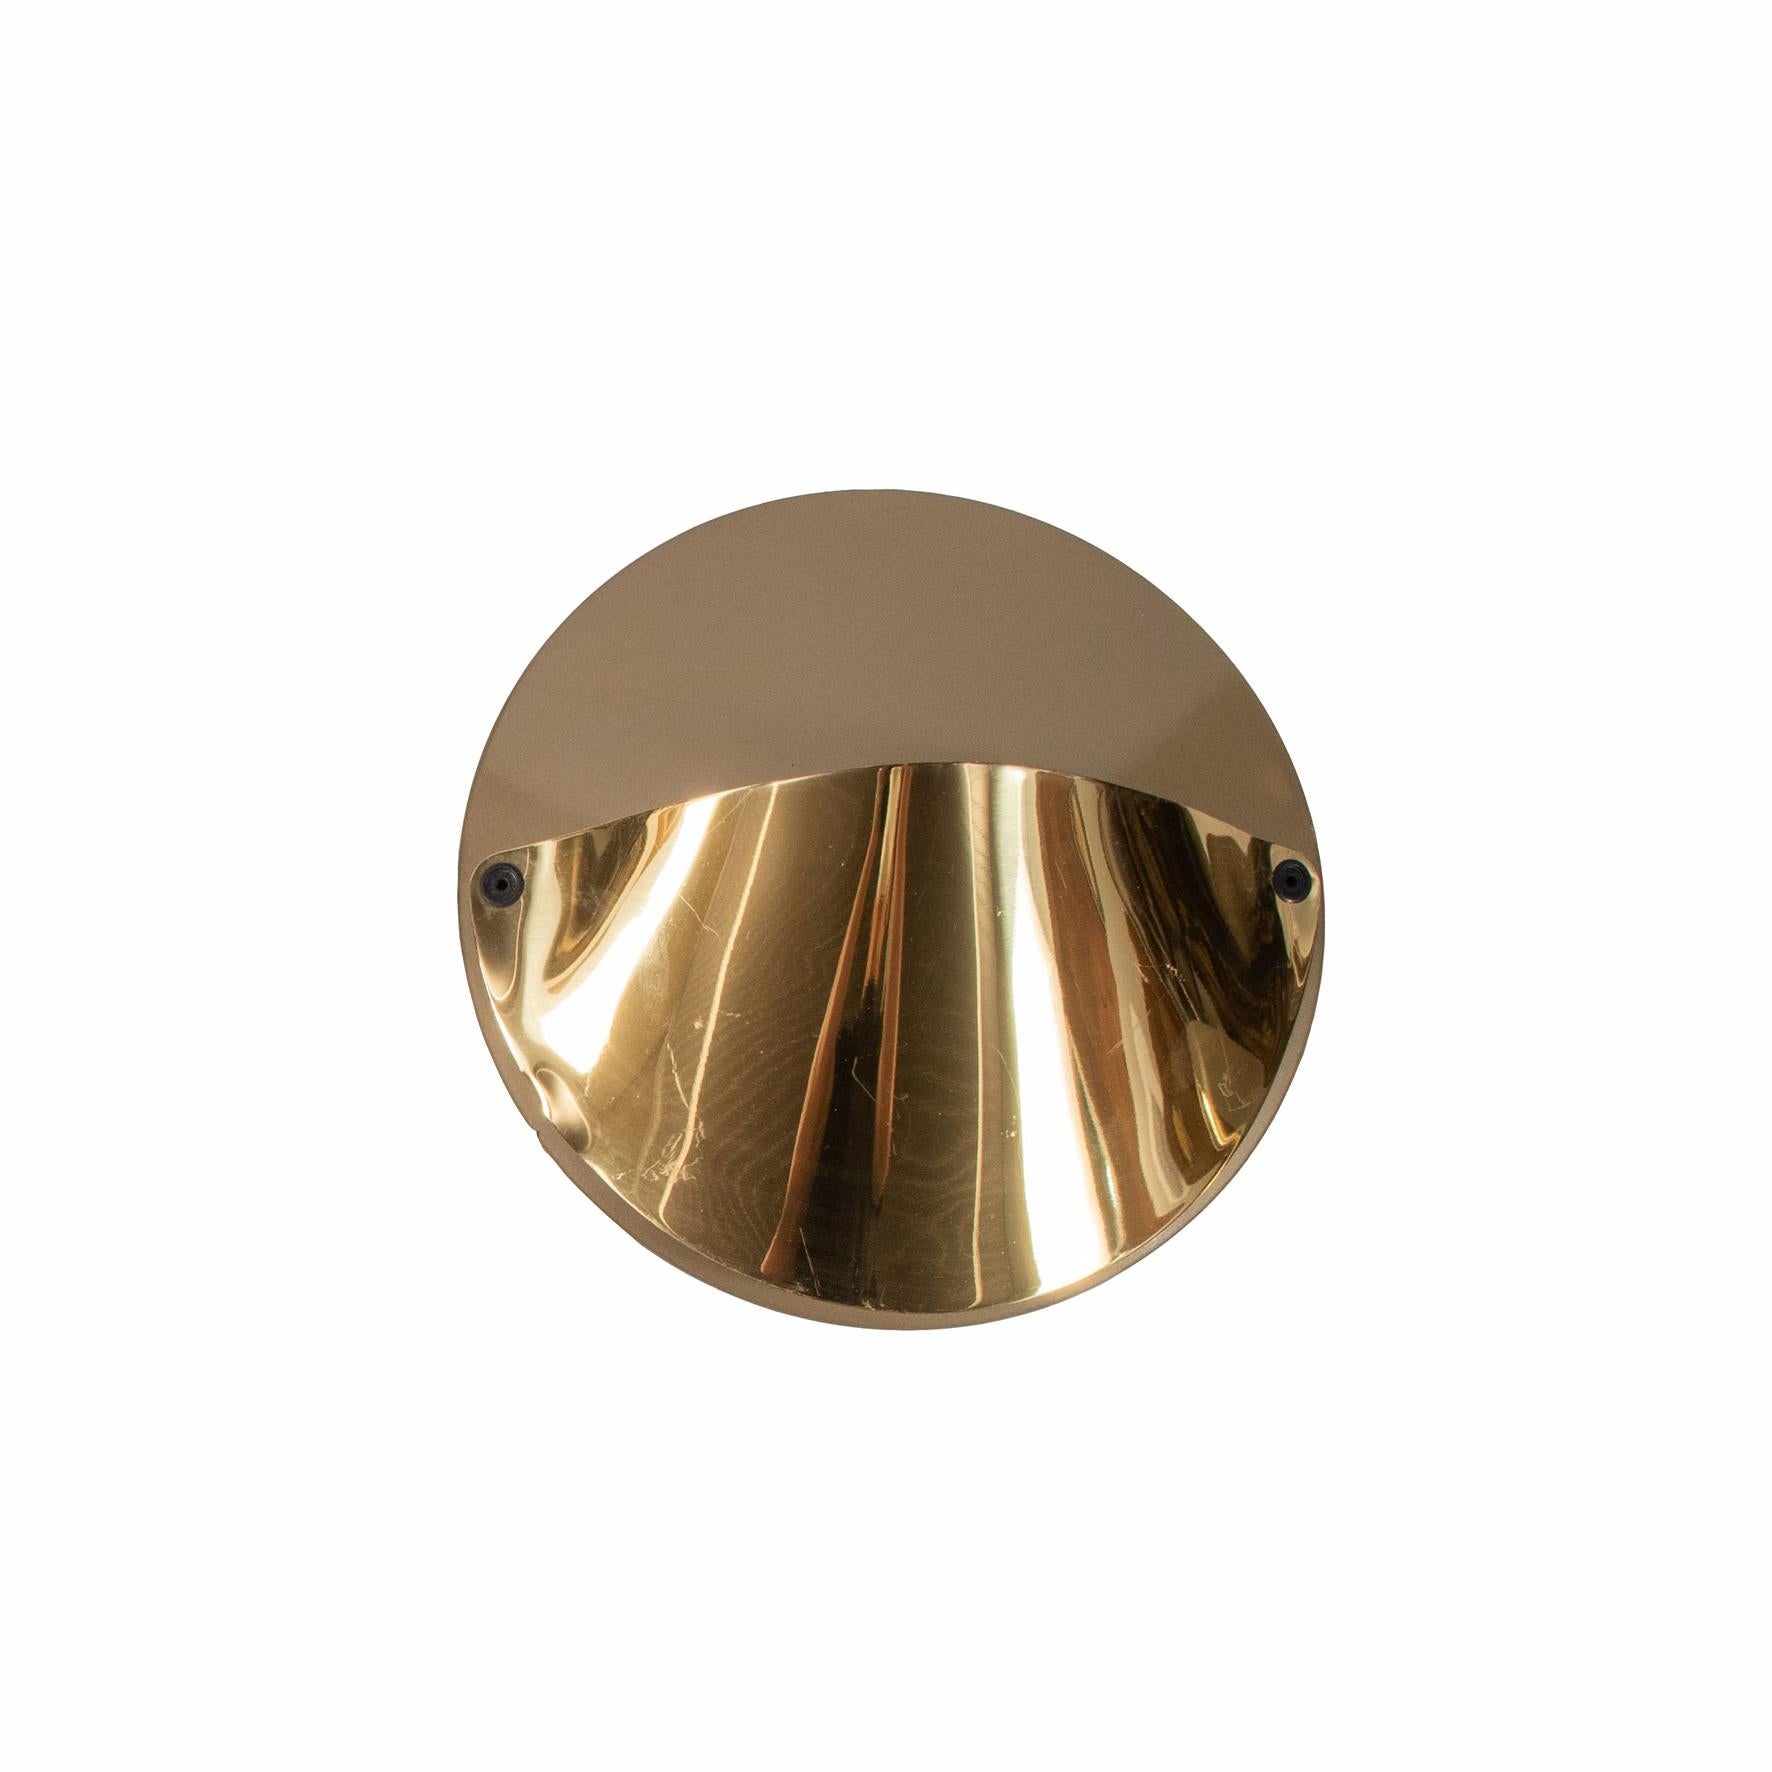 Eight circular gilt metal wall lights, with radiant backlighting.
Produced by Flos, Italy.
1982.

Literature
Domus n°646, January 1984, p.123

Domus n°654, 1984, p.151

Ottagono 80, March 1986, pp.14-15

Sergio Polano, Achille Castiglioni, Pall